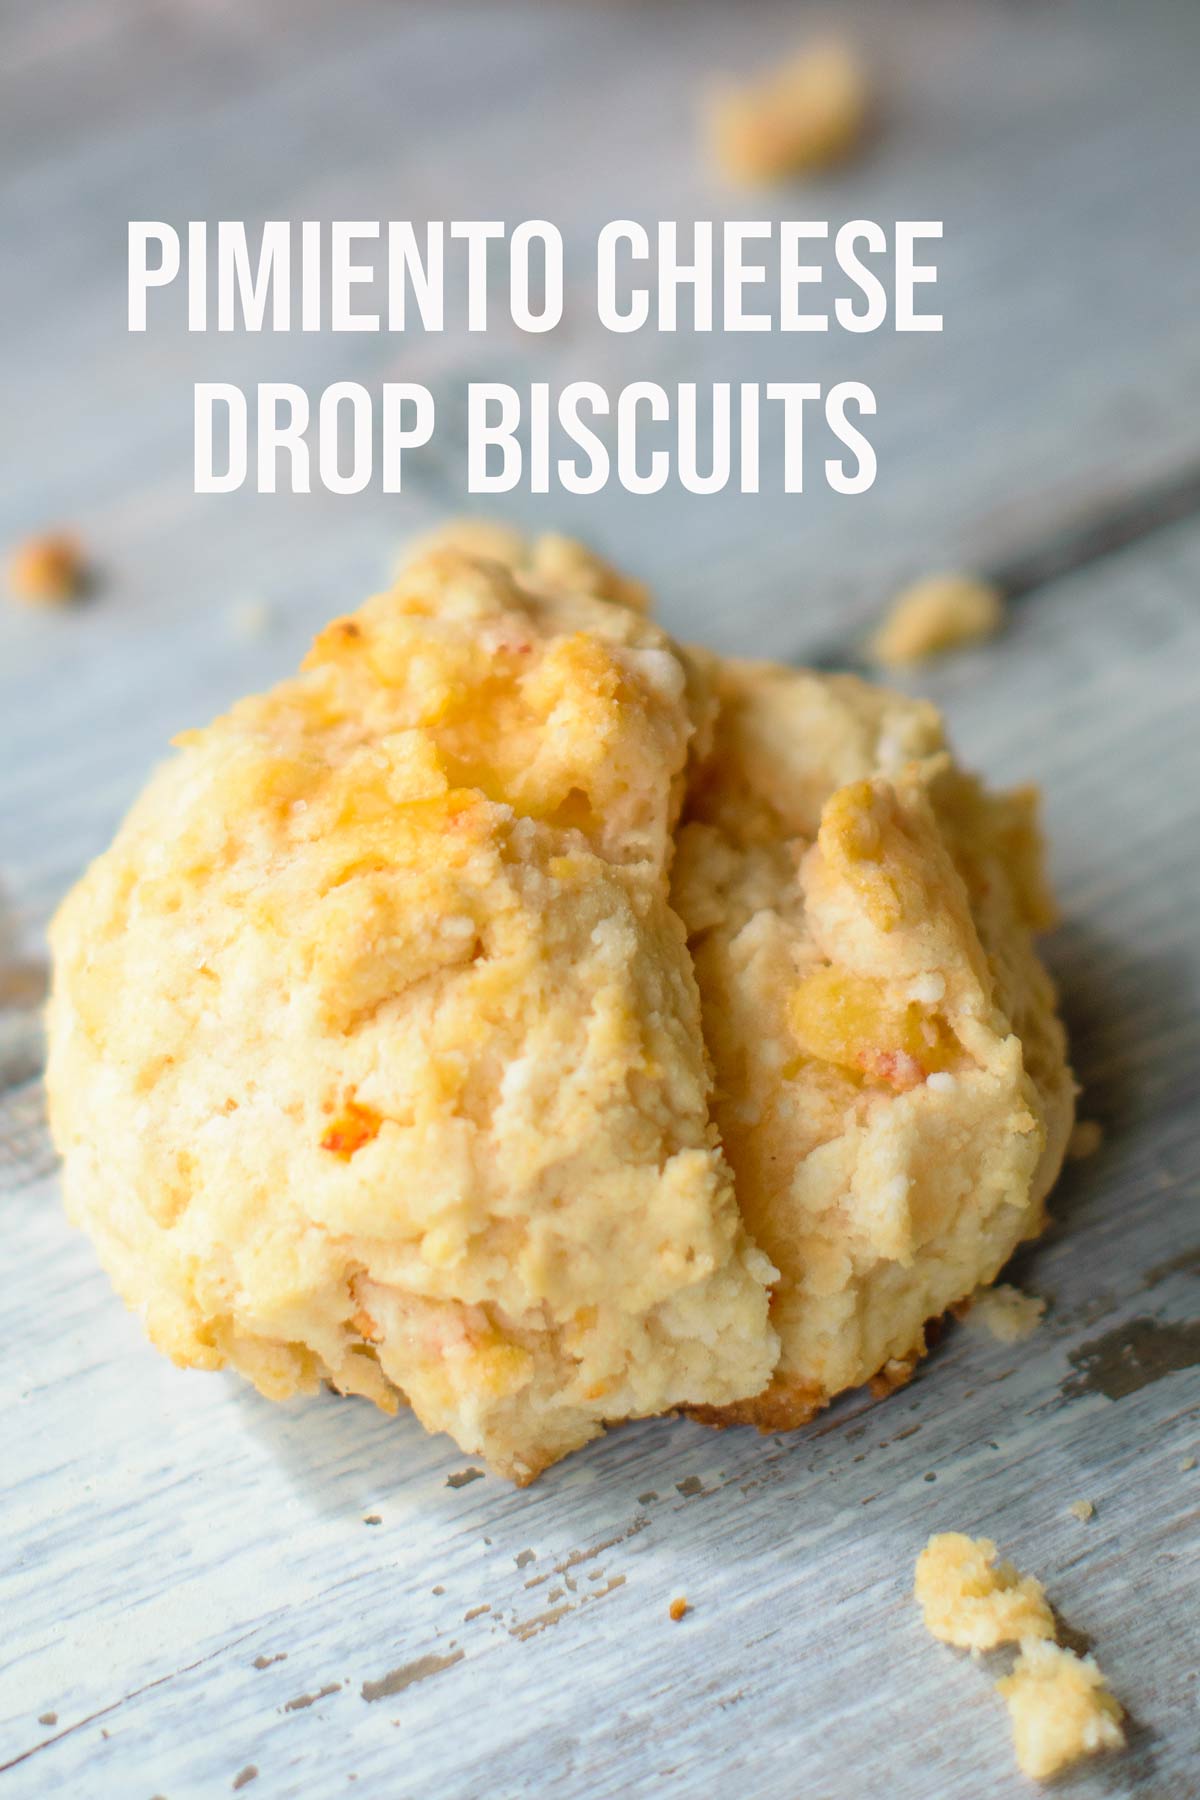 A Southern staple, pimiento cheese is the secret to these soft and savory drop biscuits. Learn all the tricks to making these delicious biscuits! They make perfect picnic food or a year round side dish! #biscuitrecipe #dropbiscuits #breadrecipes via @mrsmajorhoff